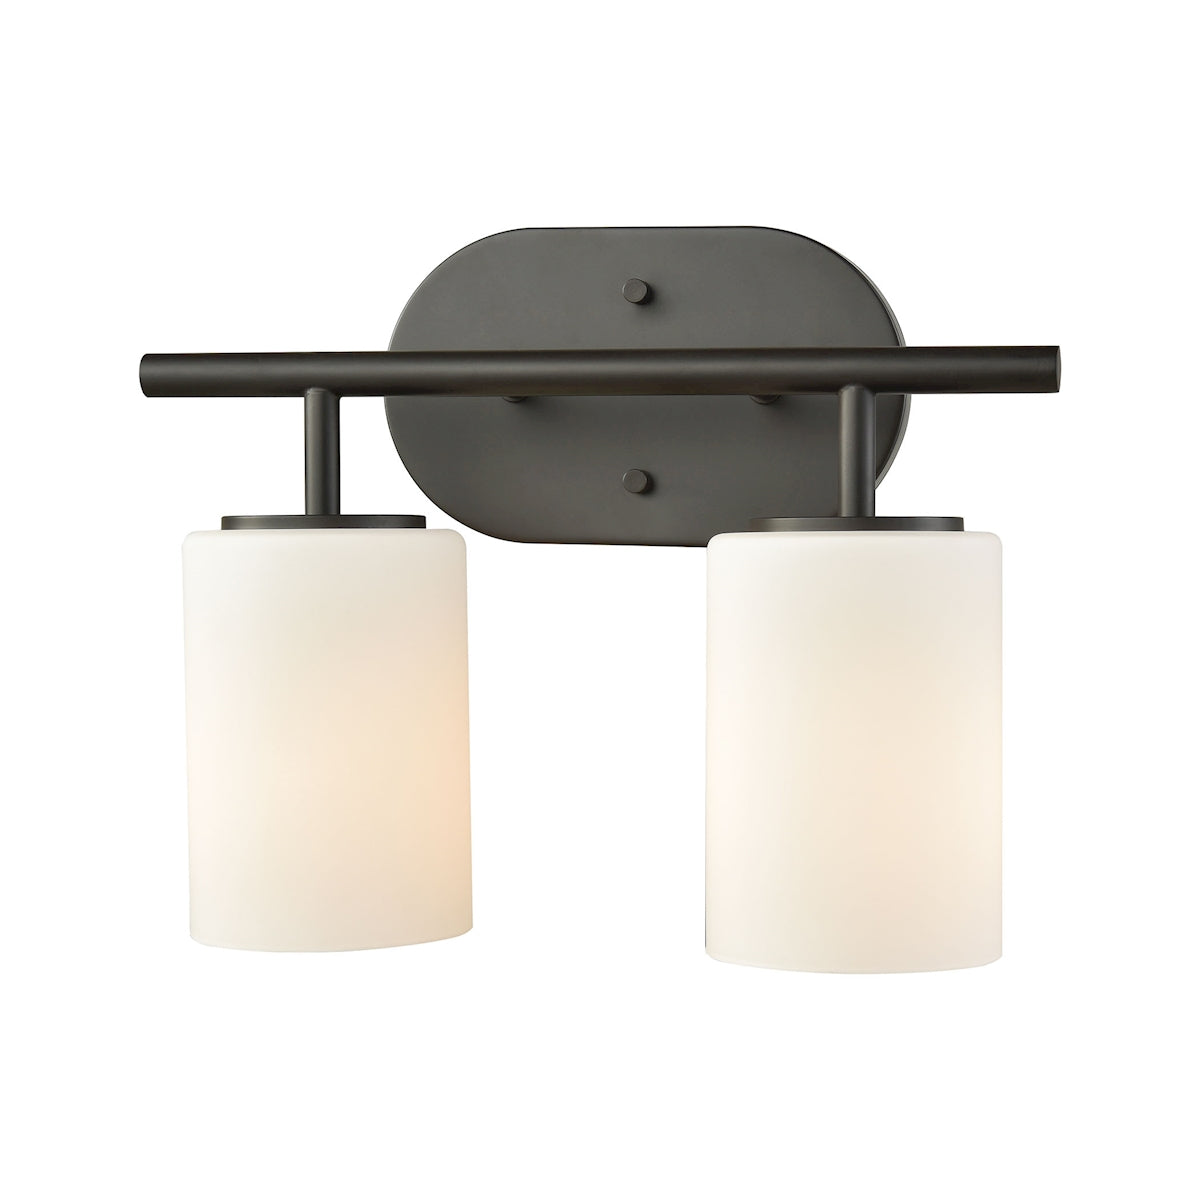 ELK Lighting 57141/2 Pemlico 2-Light Vanity Lamp in Oil Rubbed Bronze with White Glass